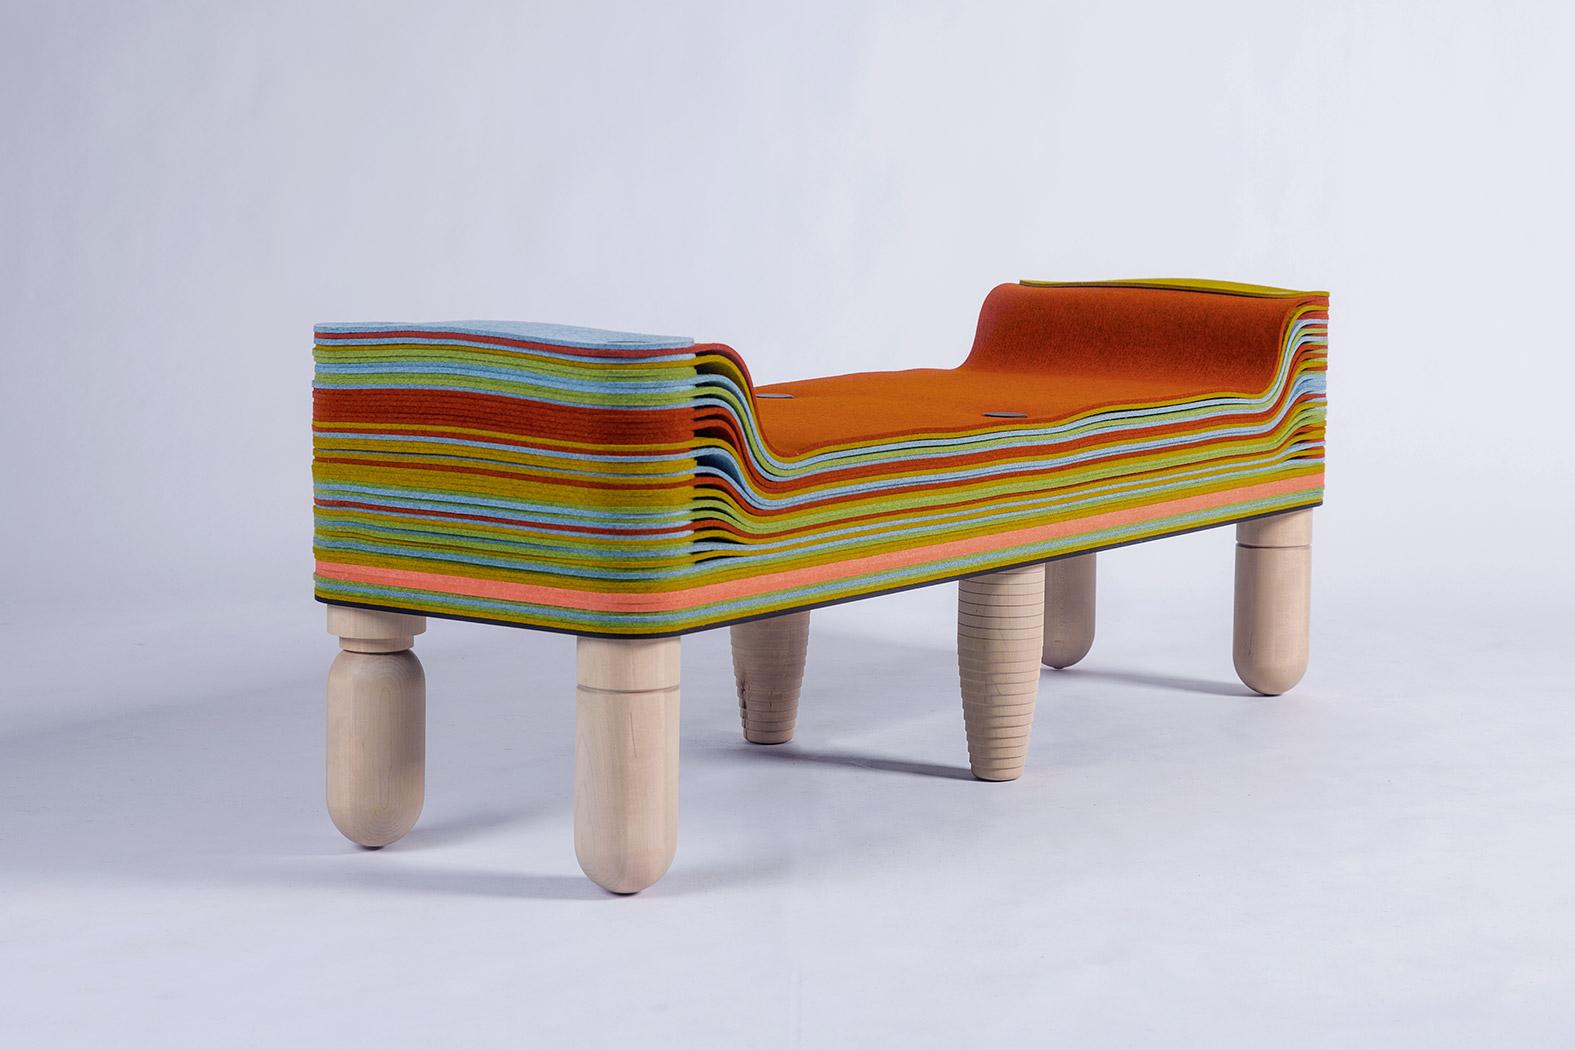 Canadian Maxine D, Felt and Wood Bench, Benoist F. Drut in STACKABL, Canada, 2021 For Sale